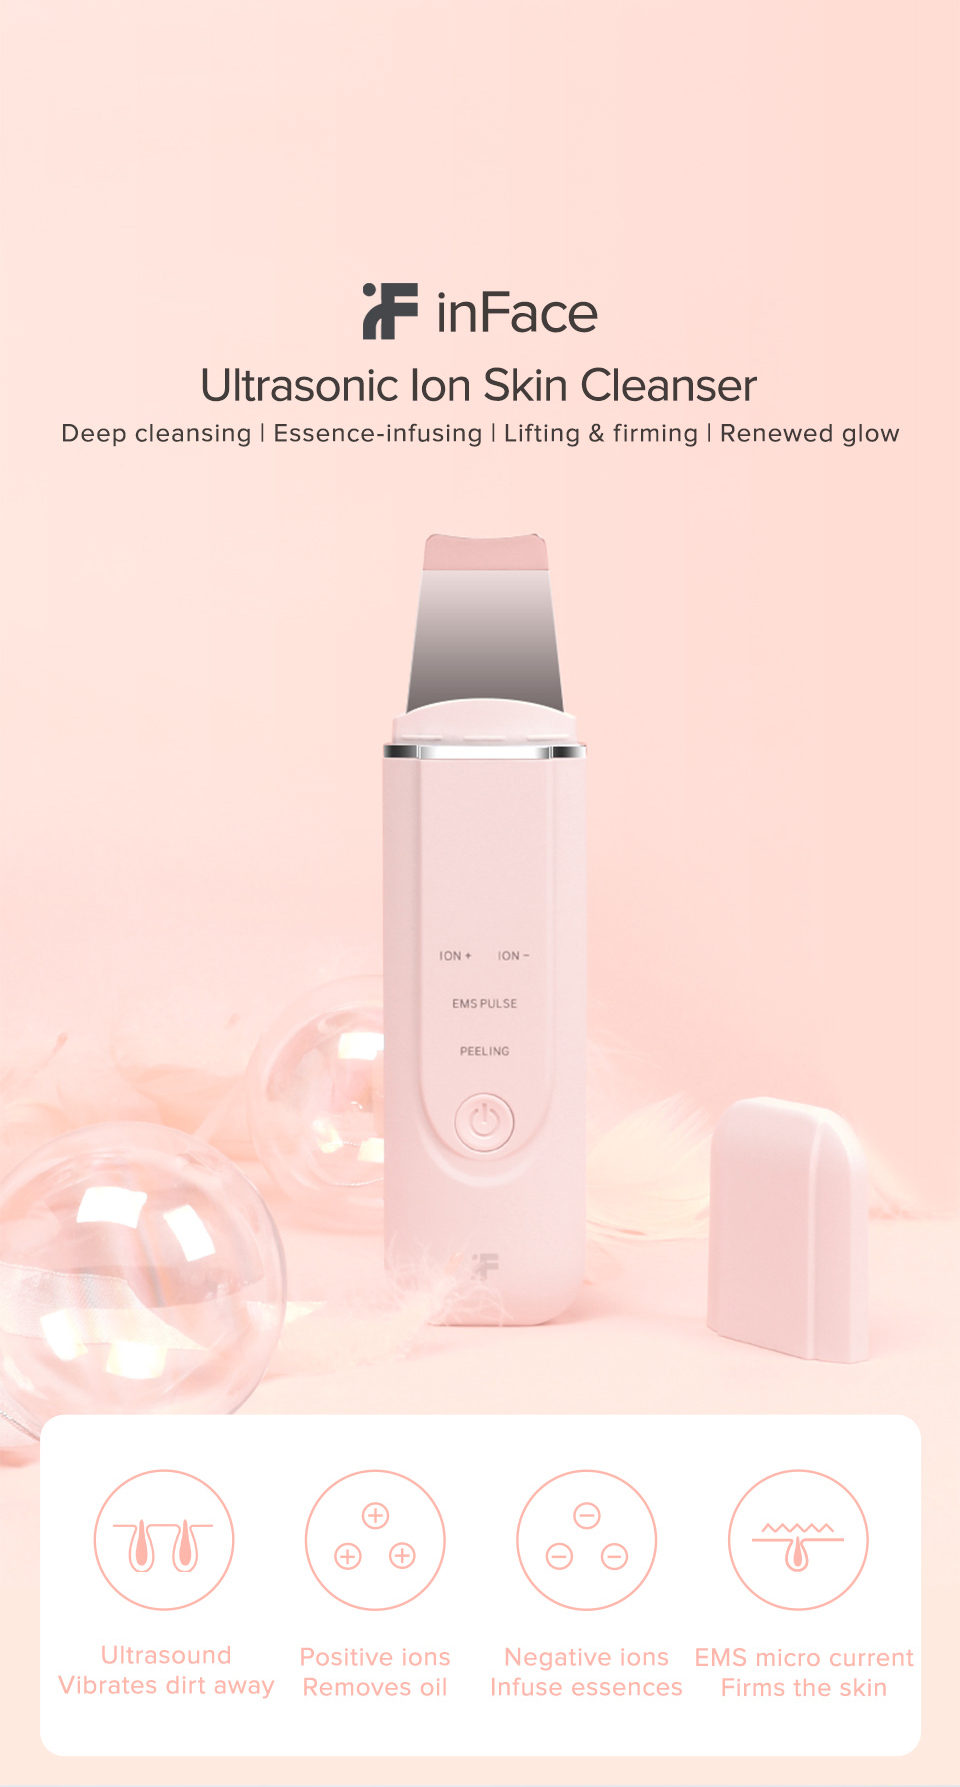 Facial Skin Ultrasonic Ion Cleaner Inface